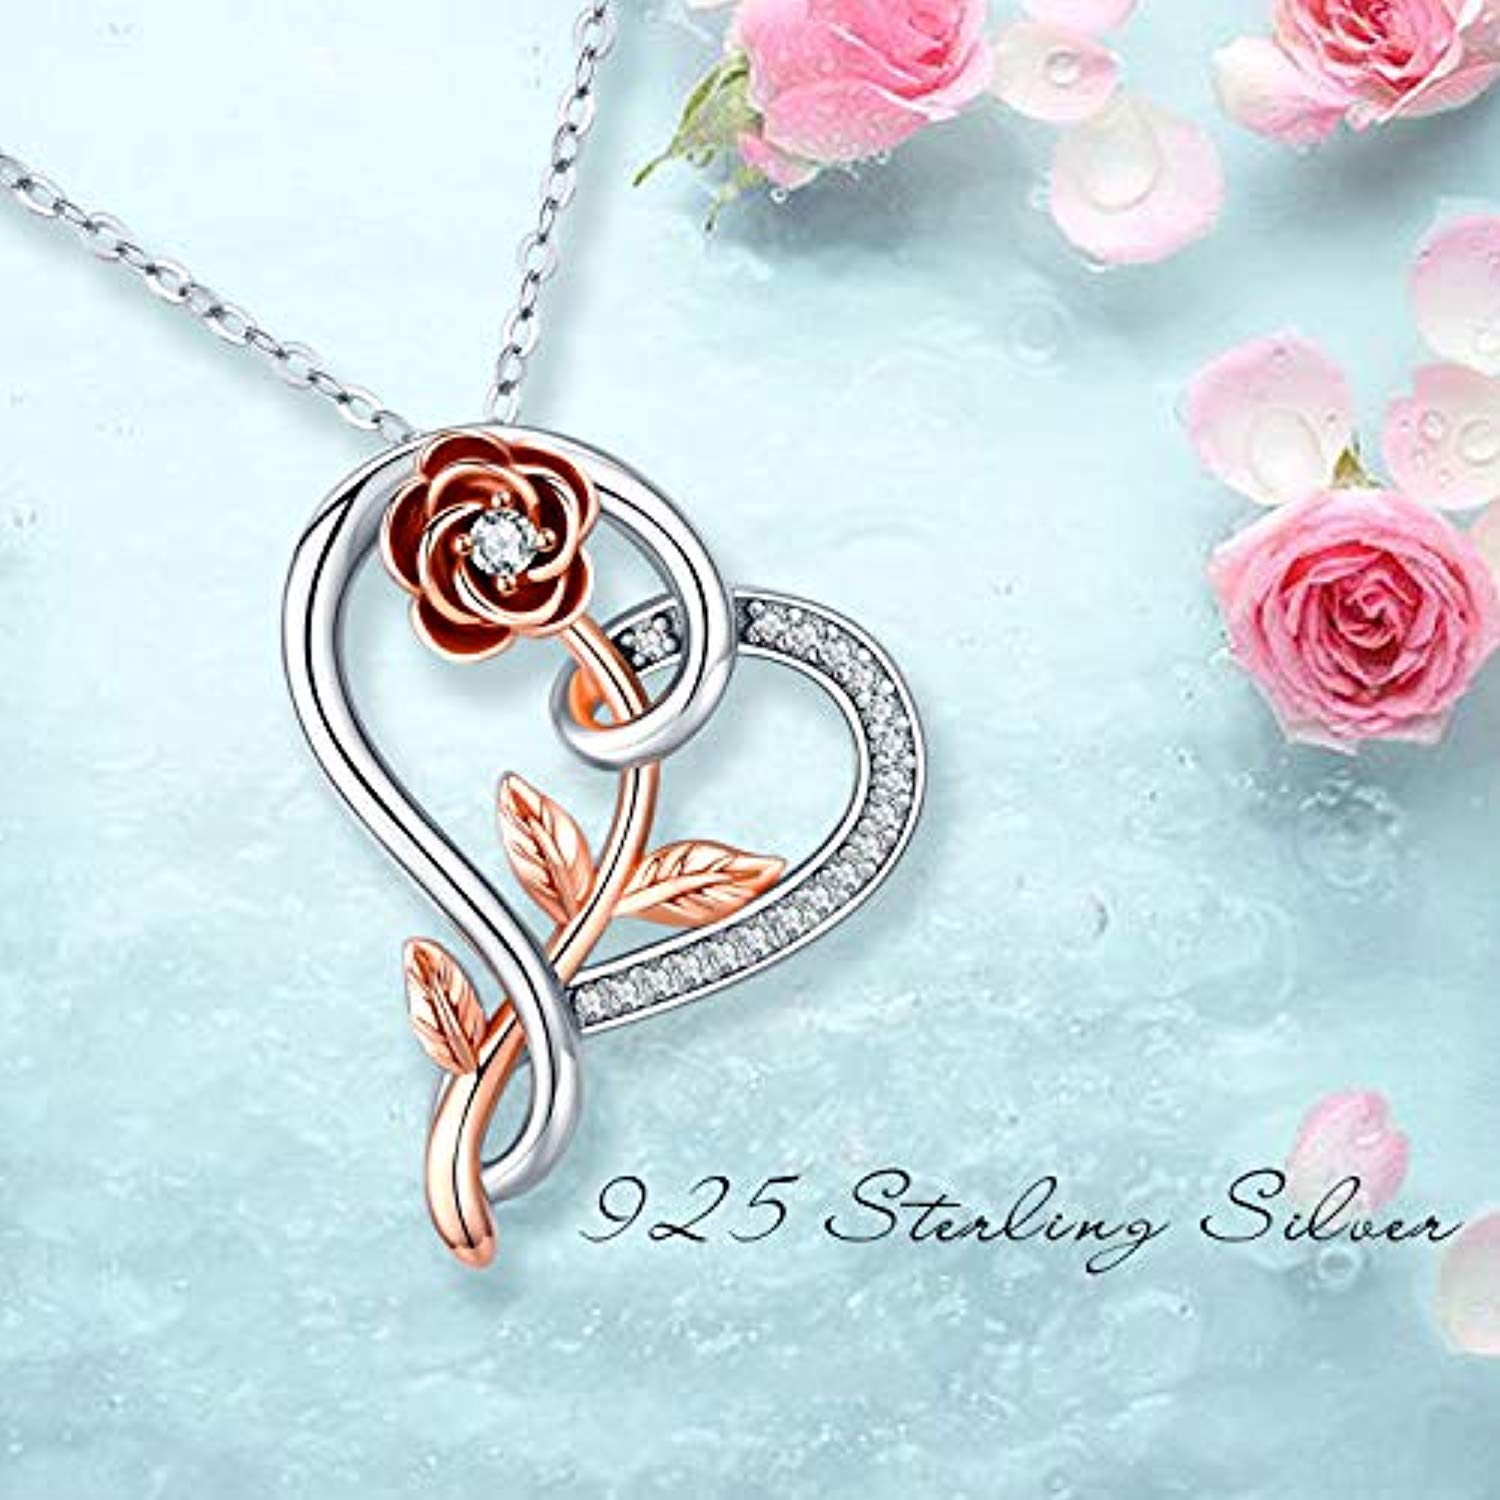 Sterling Silver Rose Flower Love Heart Pendant Necklace Jewelry Gifts for Women